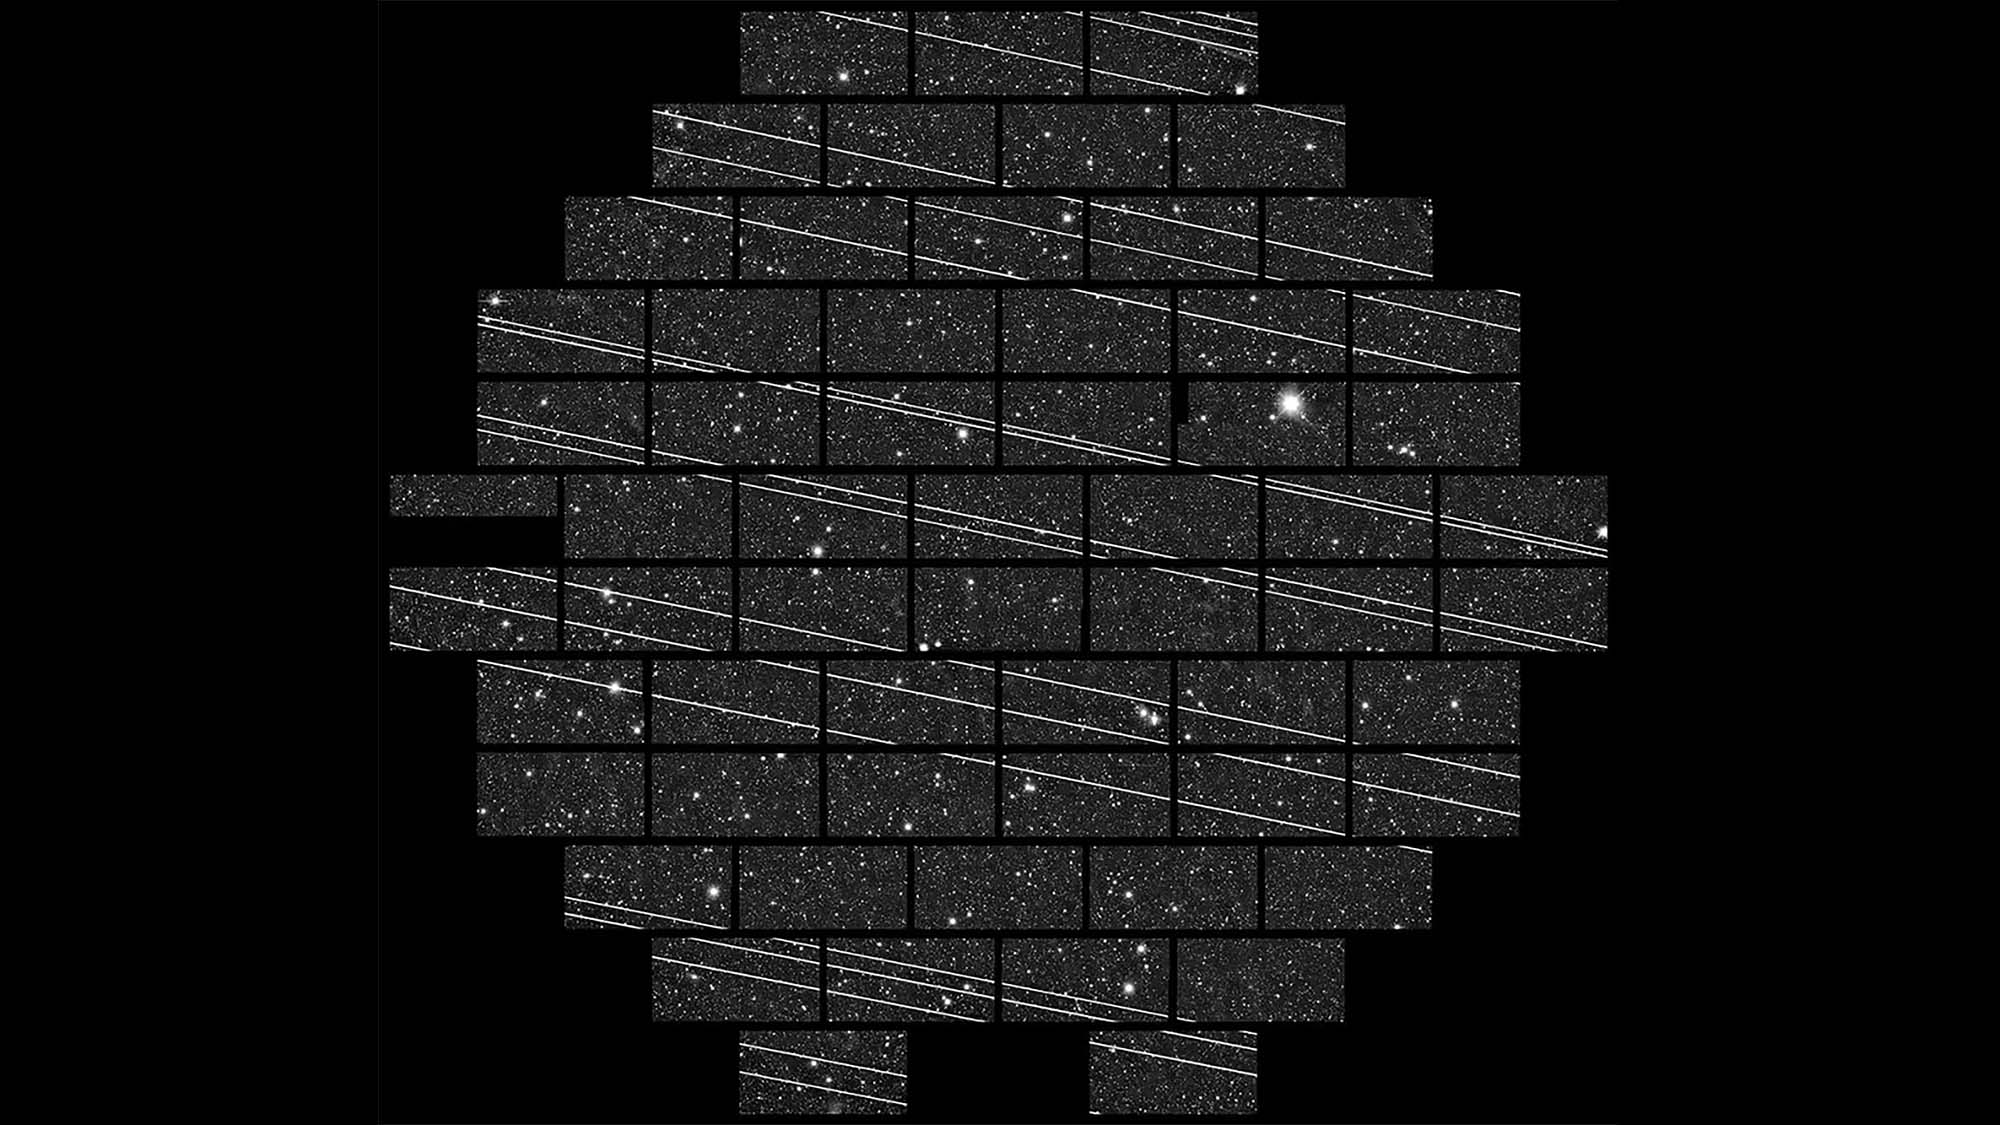 An image from the Cerro Tololo Inter-American Observatory shows streaks left by Starlink satellites